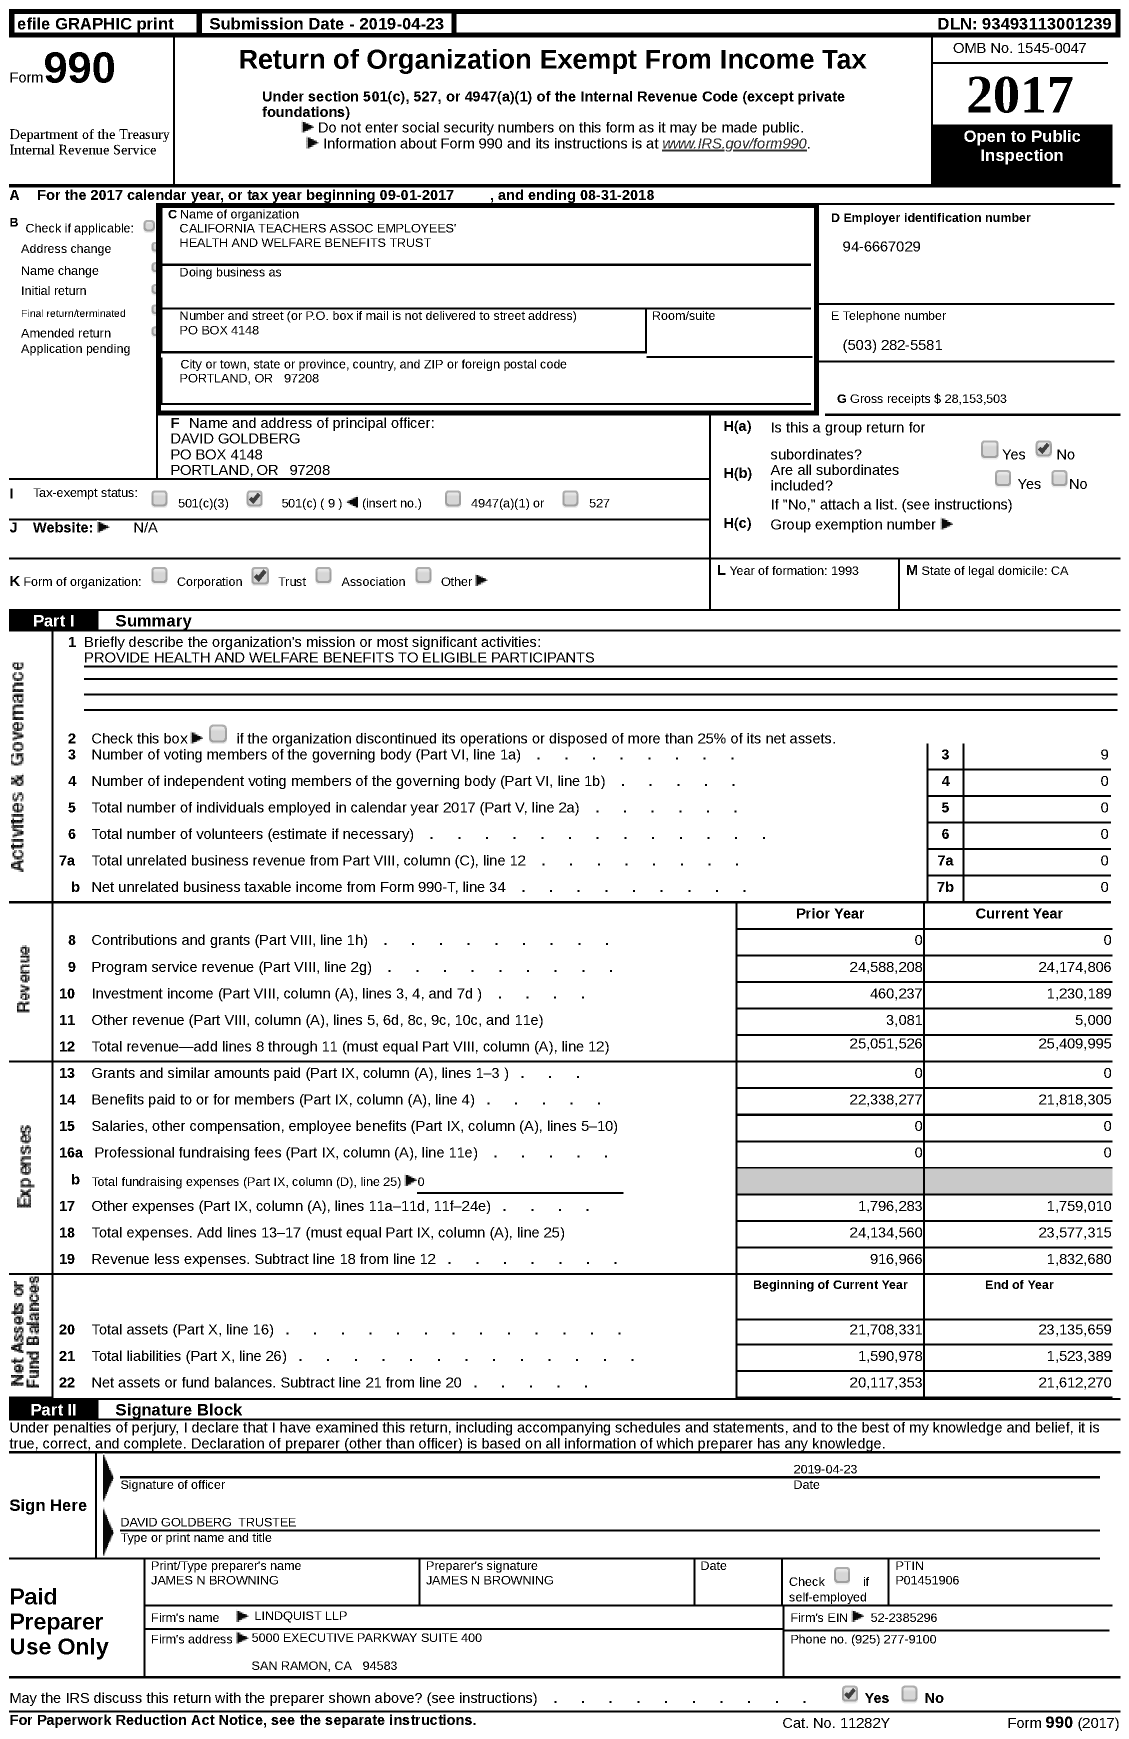 Image of first page of 2017 Form 990 for California Teachers Association Employees' Health and Welfare Benefits Trust